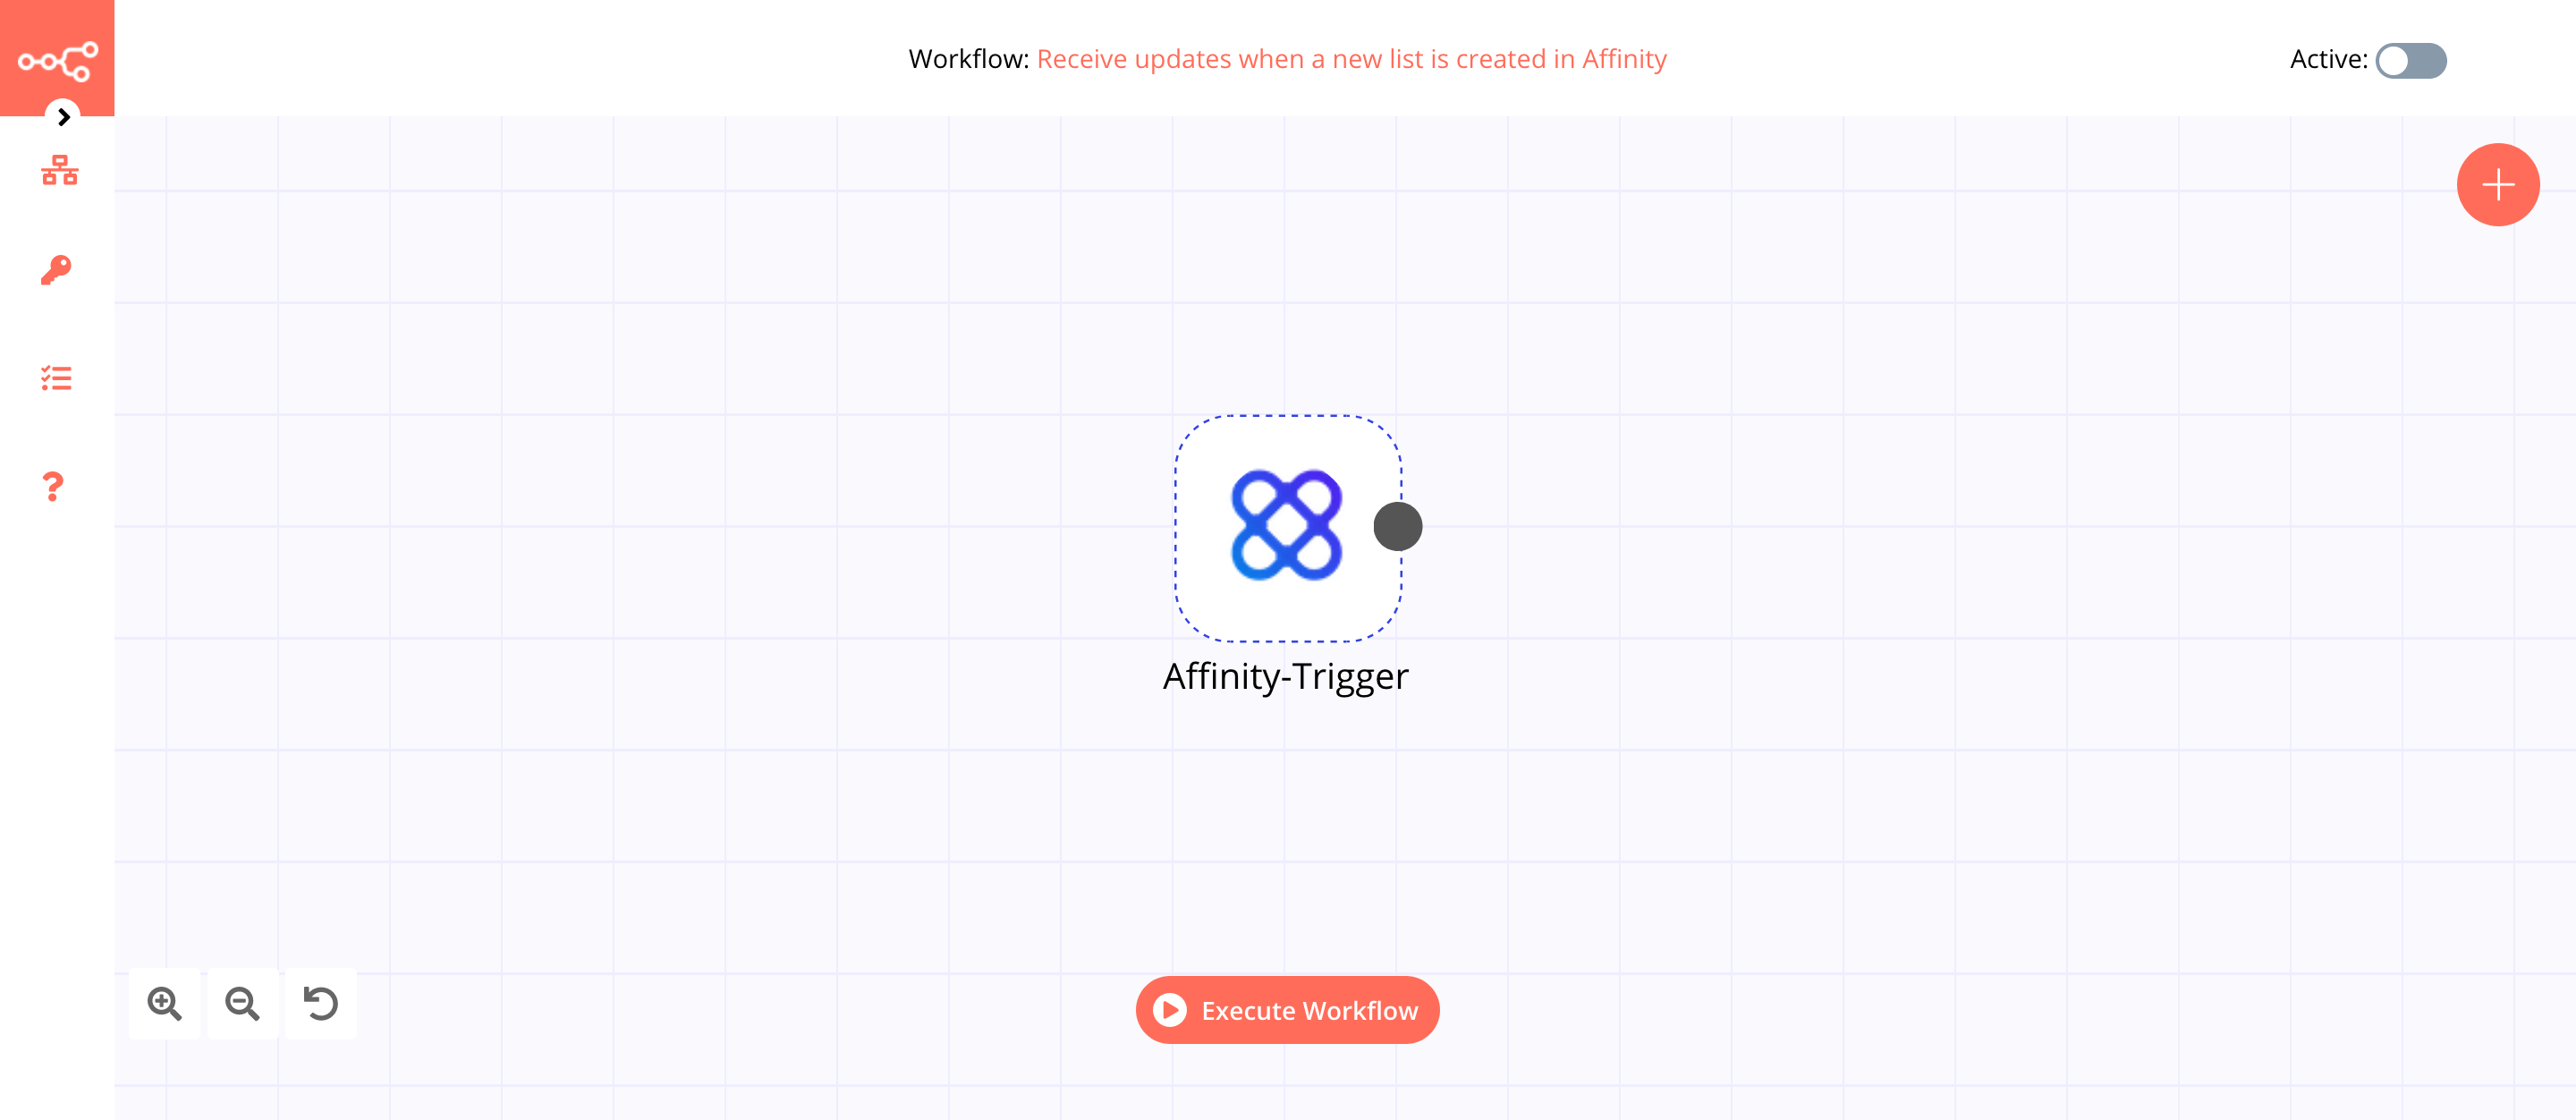 A workflow with the Affinity Trigger node